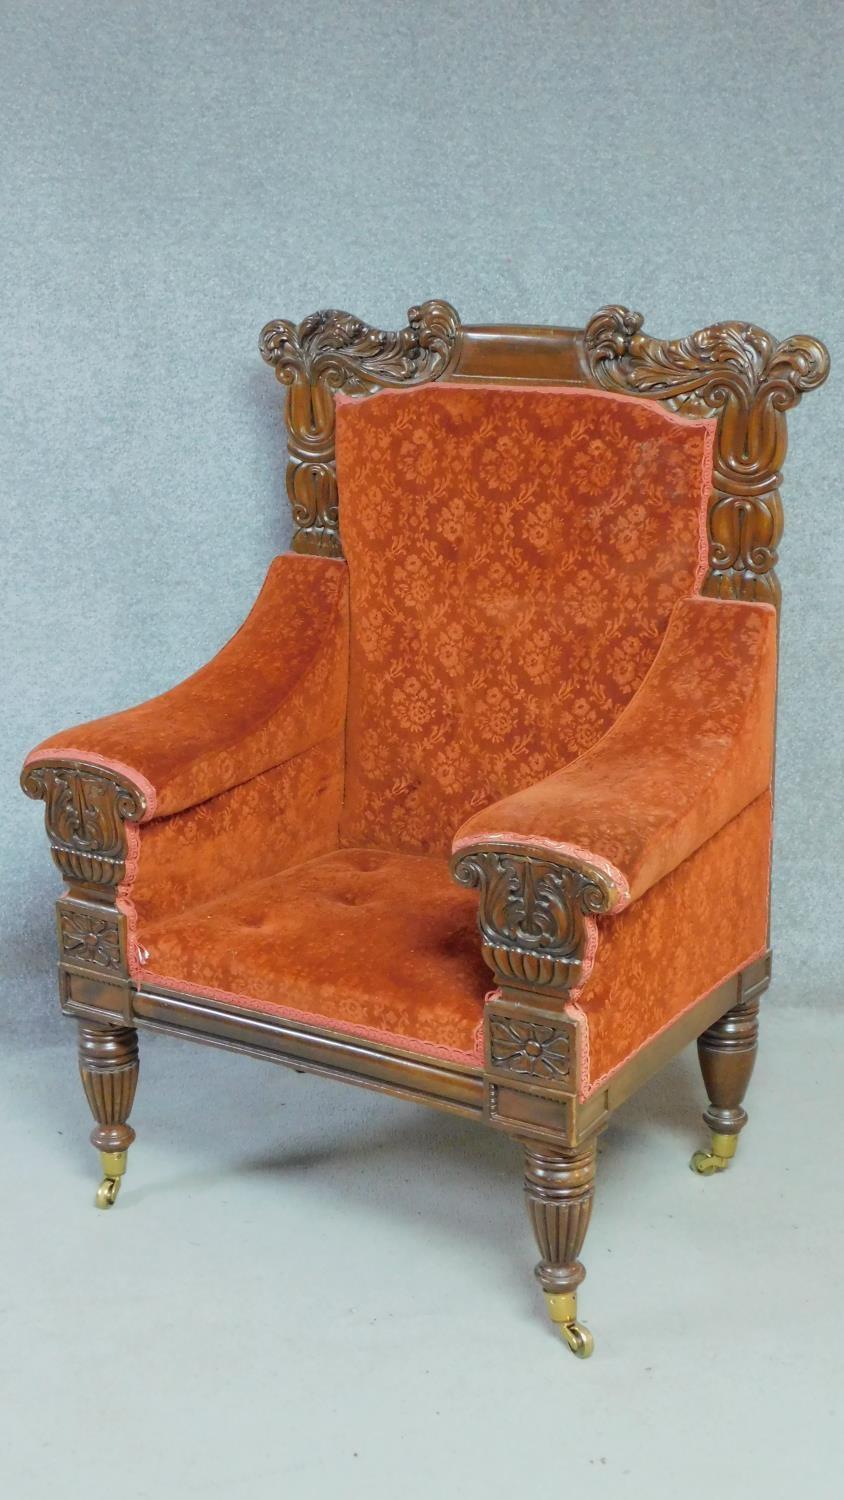 A large Regency mahogany carved throne chair in floral buttoned rouge upholstery on reeded tapering